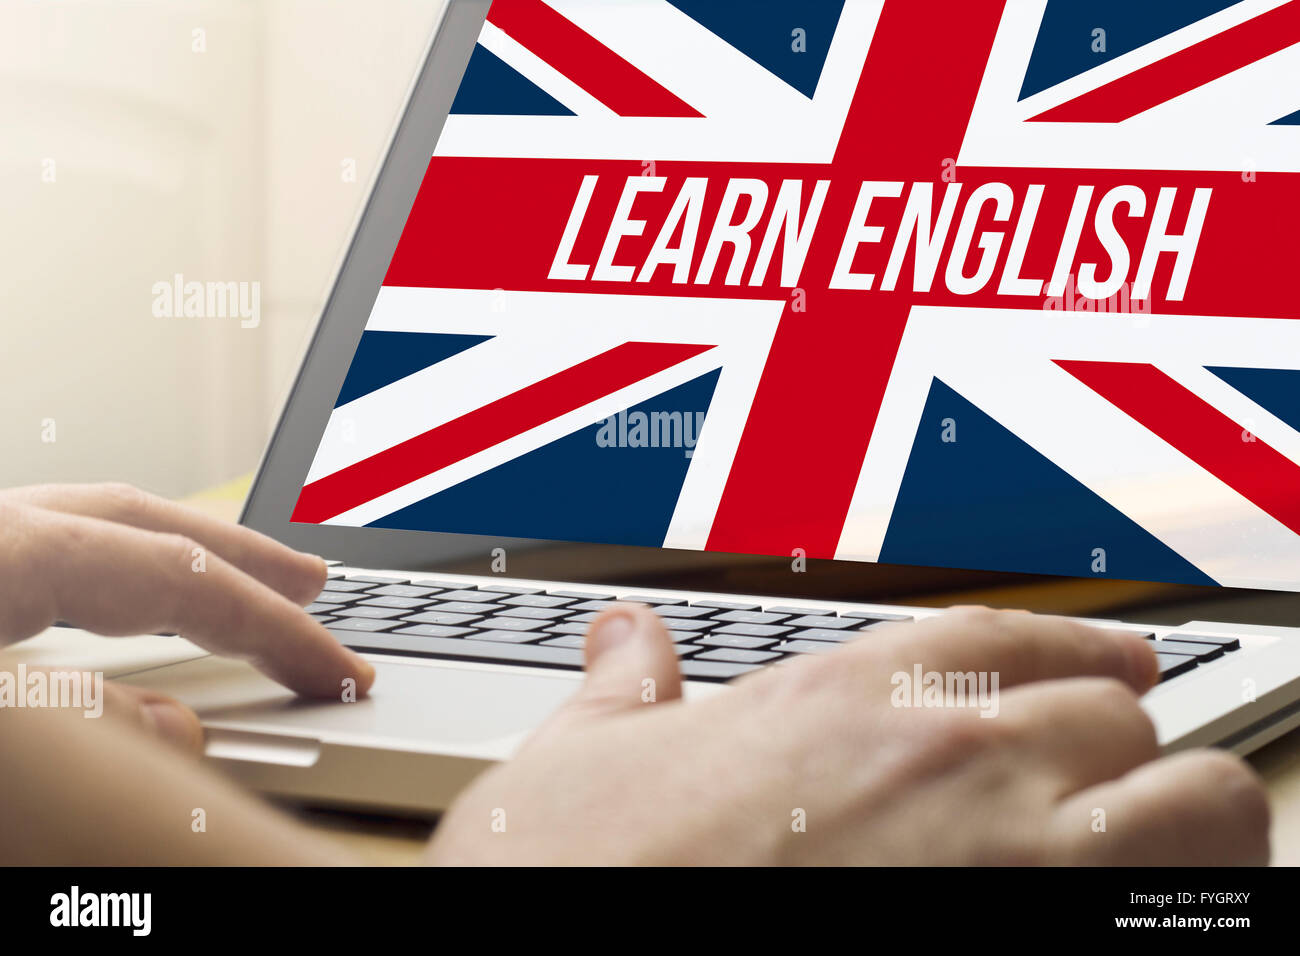 online business concept: man using a laptop with learn english on the screen. Screen graphics are made up. Stock Photo